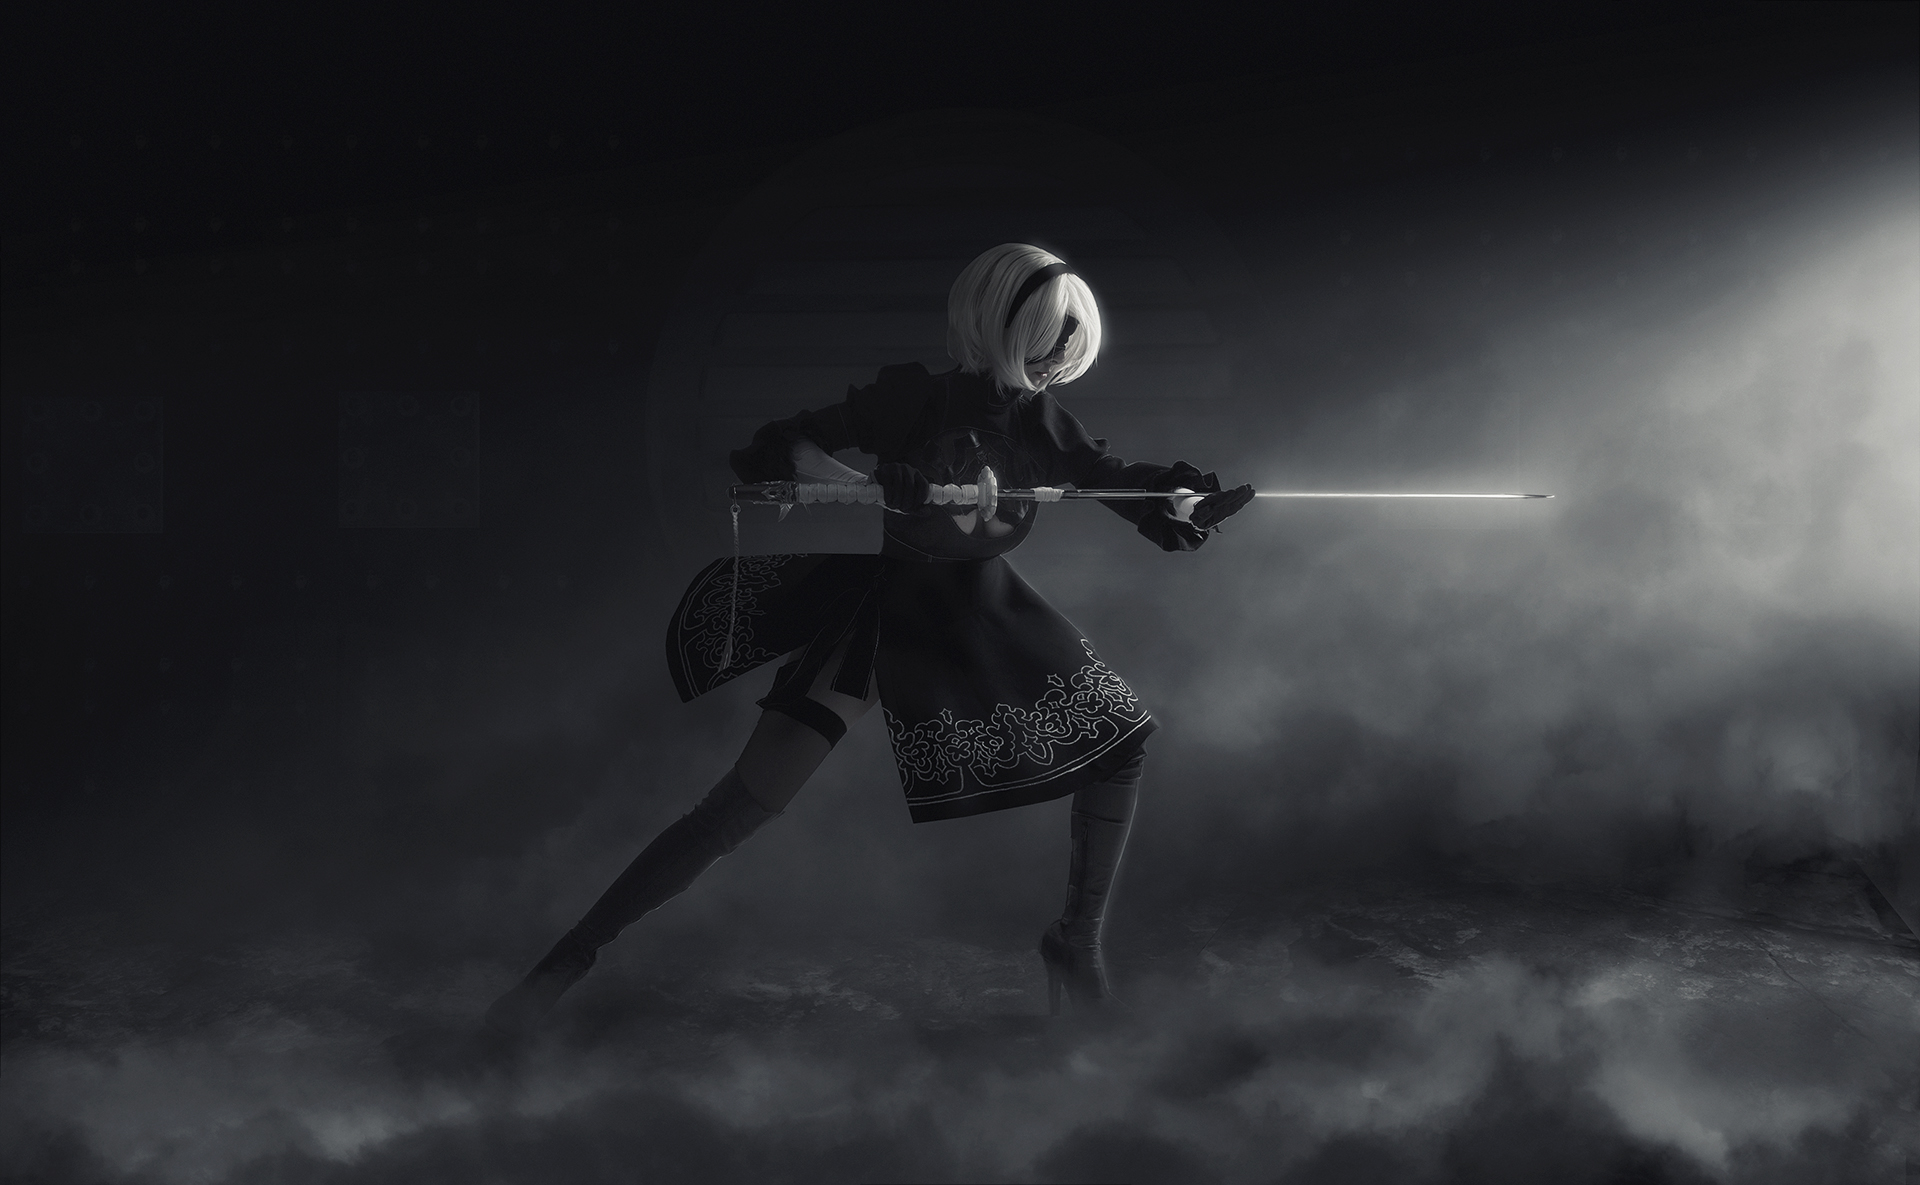 Nier Automata Cosplay Wallpaper Hd Games 4k Wallpapers Images Photos And Background